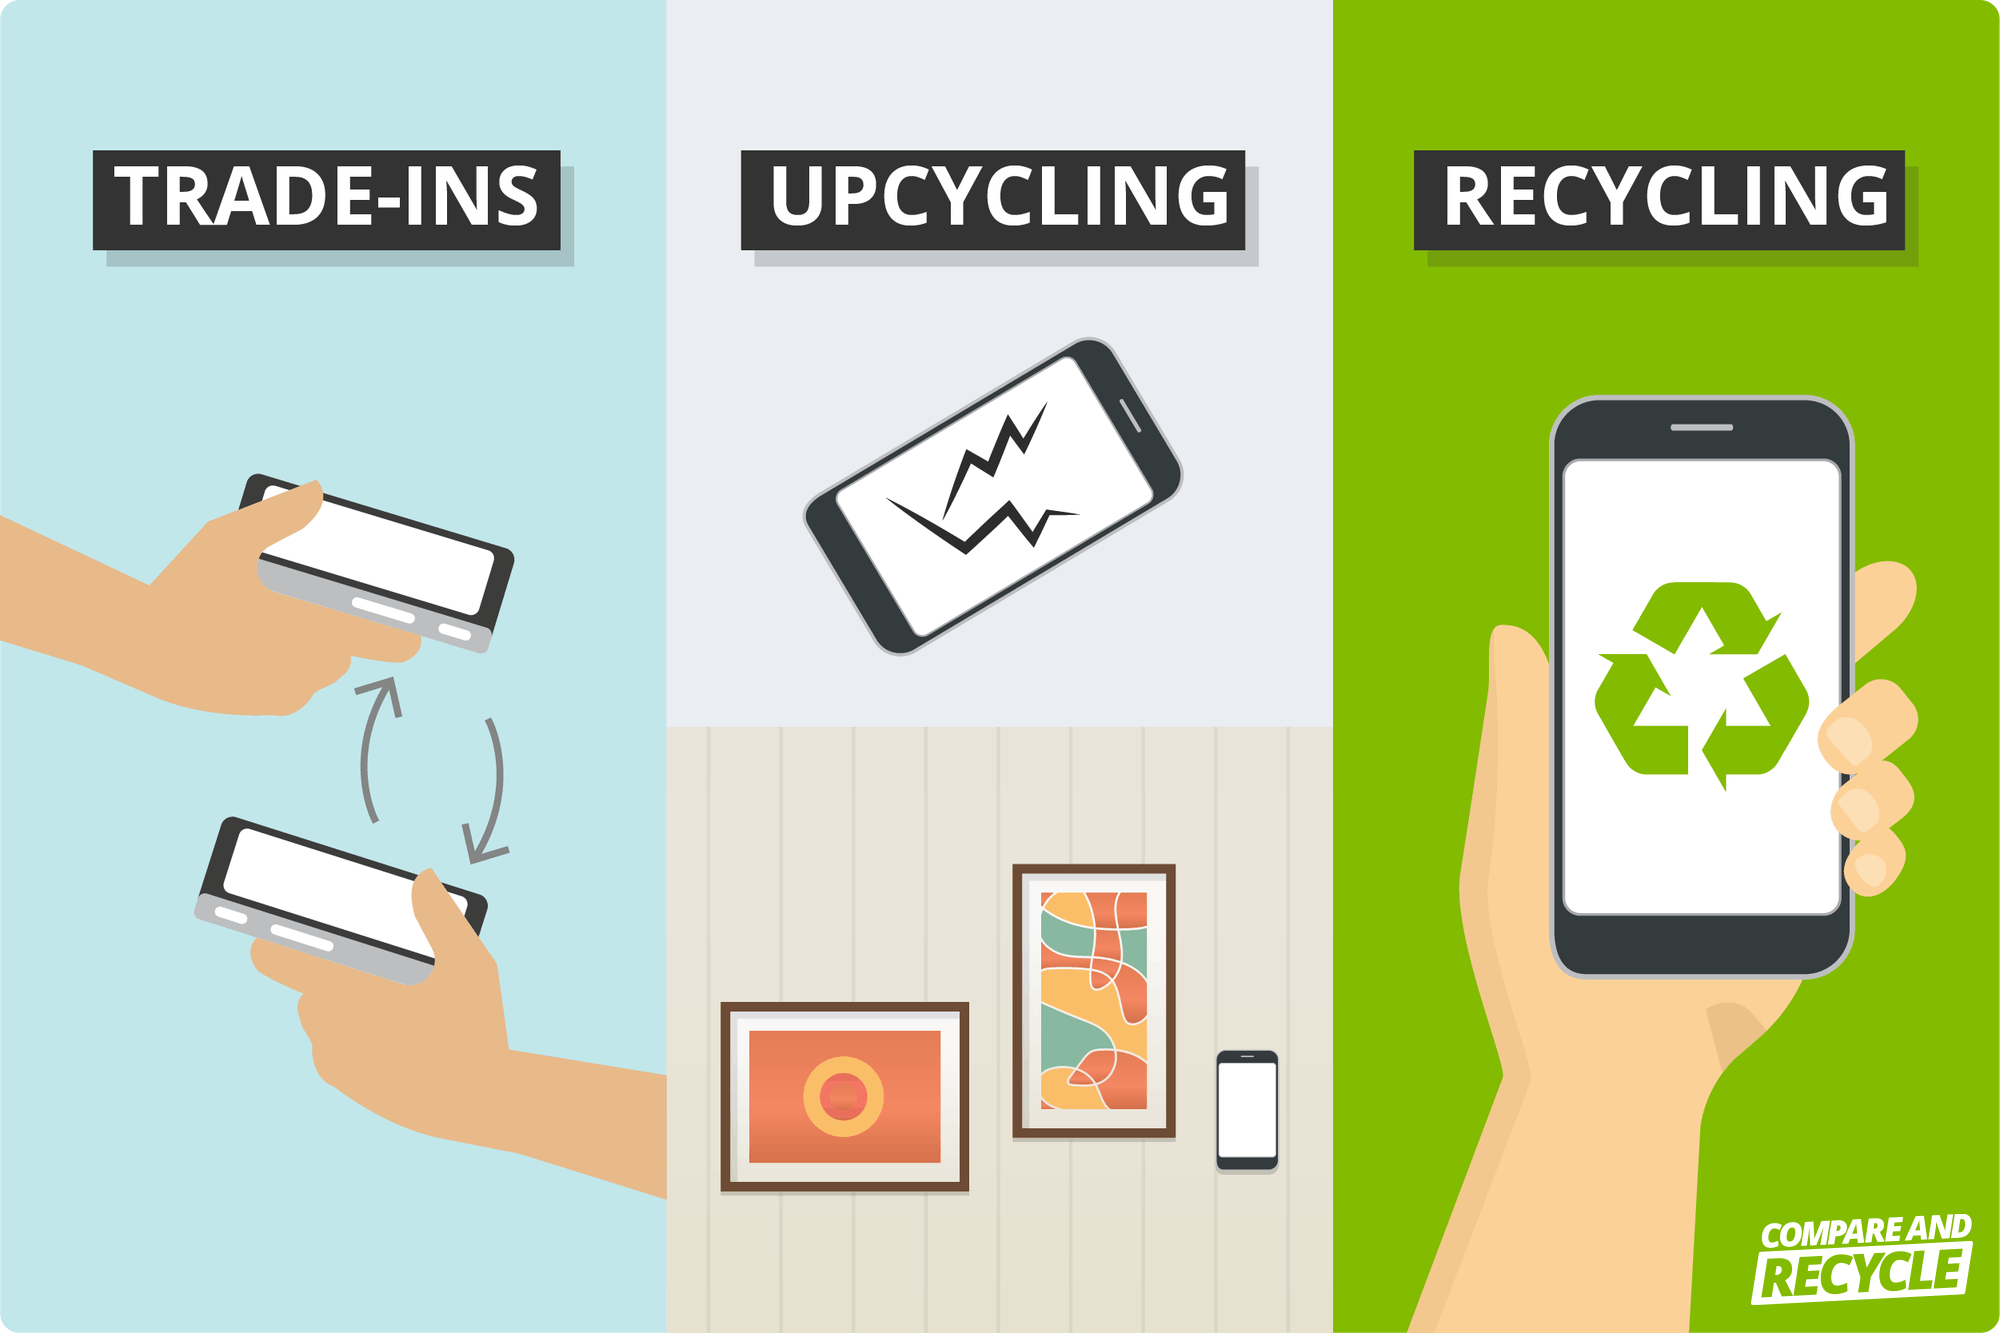 3 ways to sustainably dispose of your smartphone